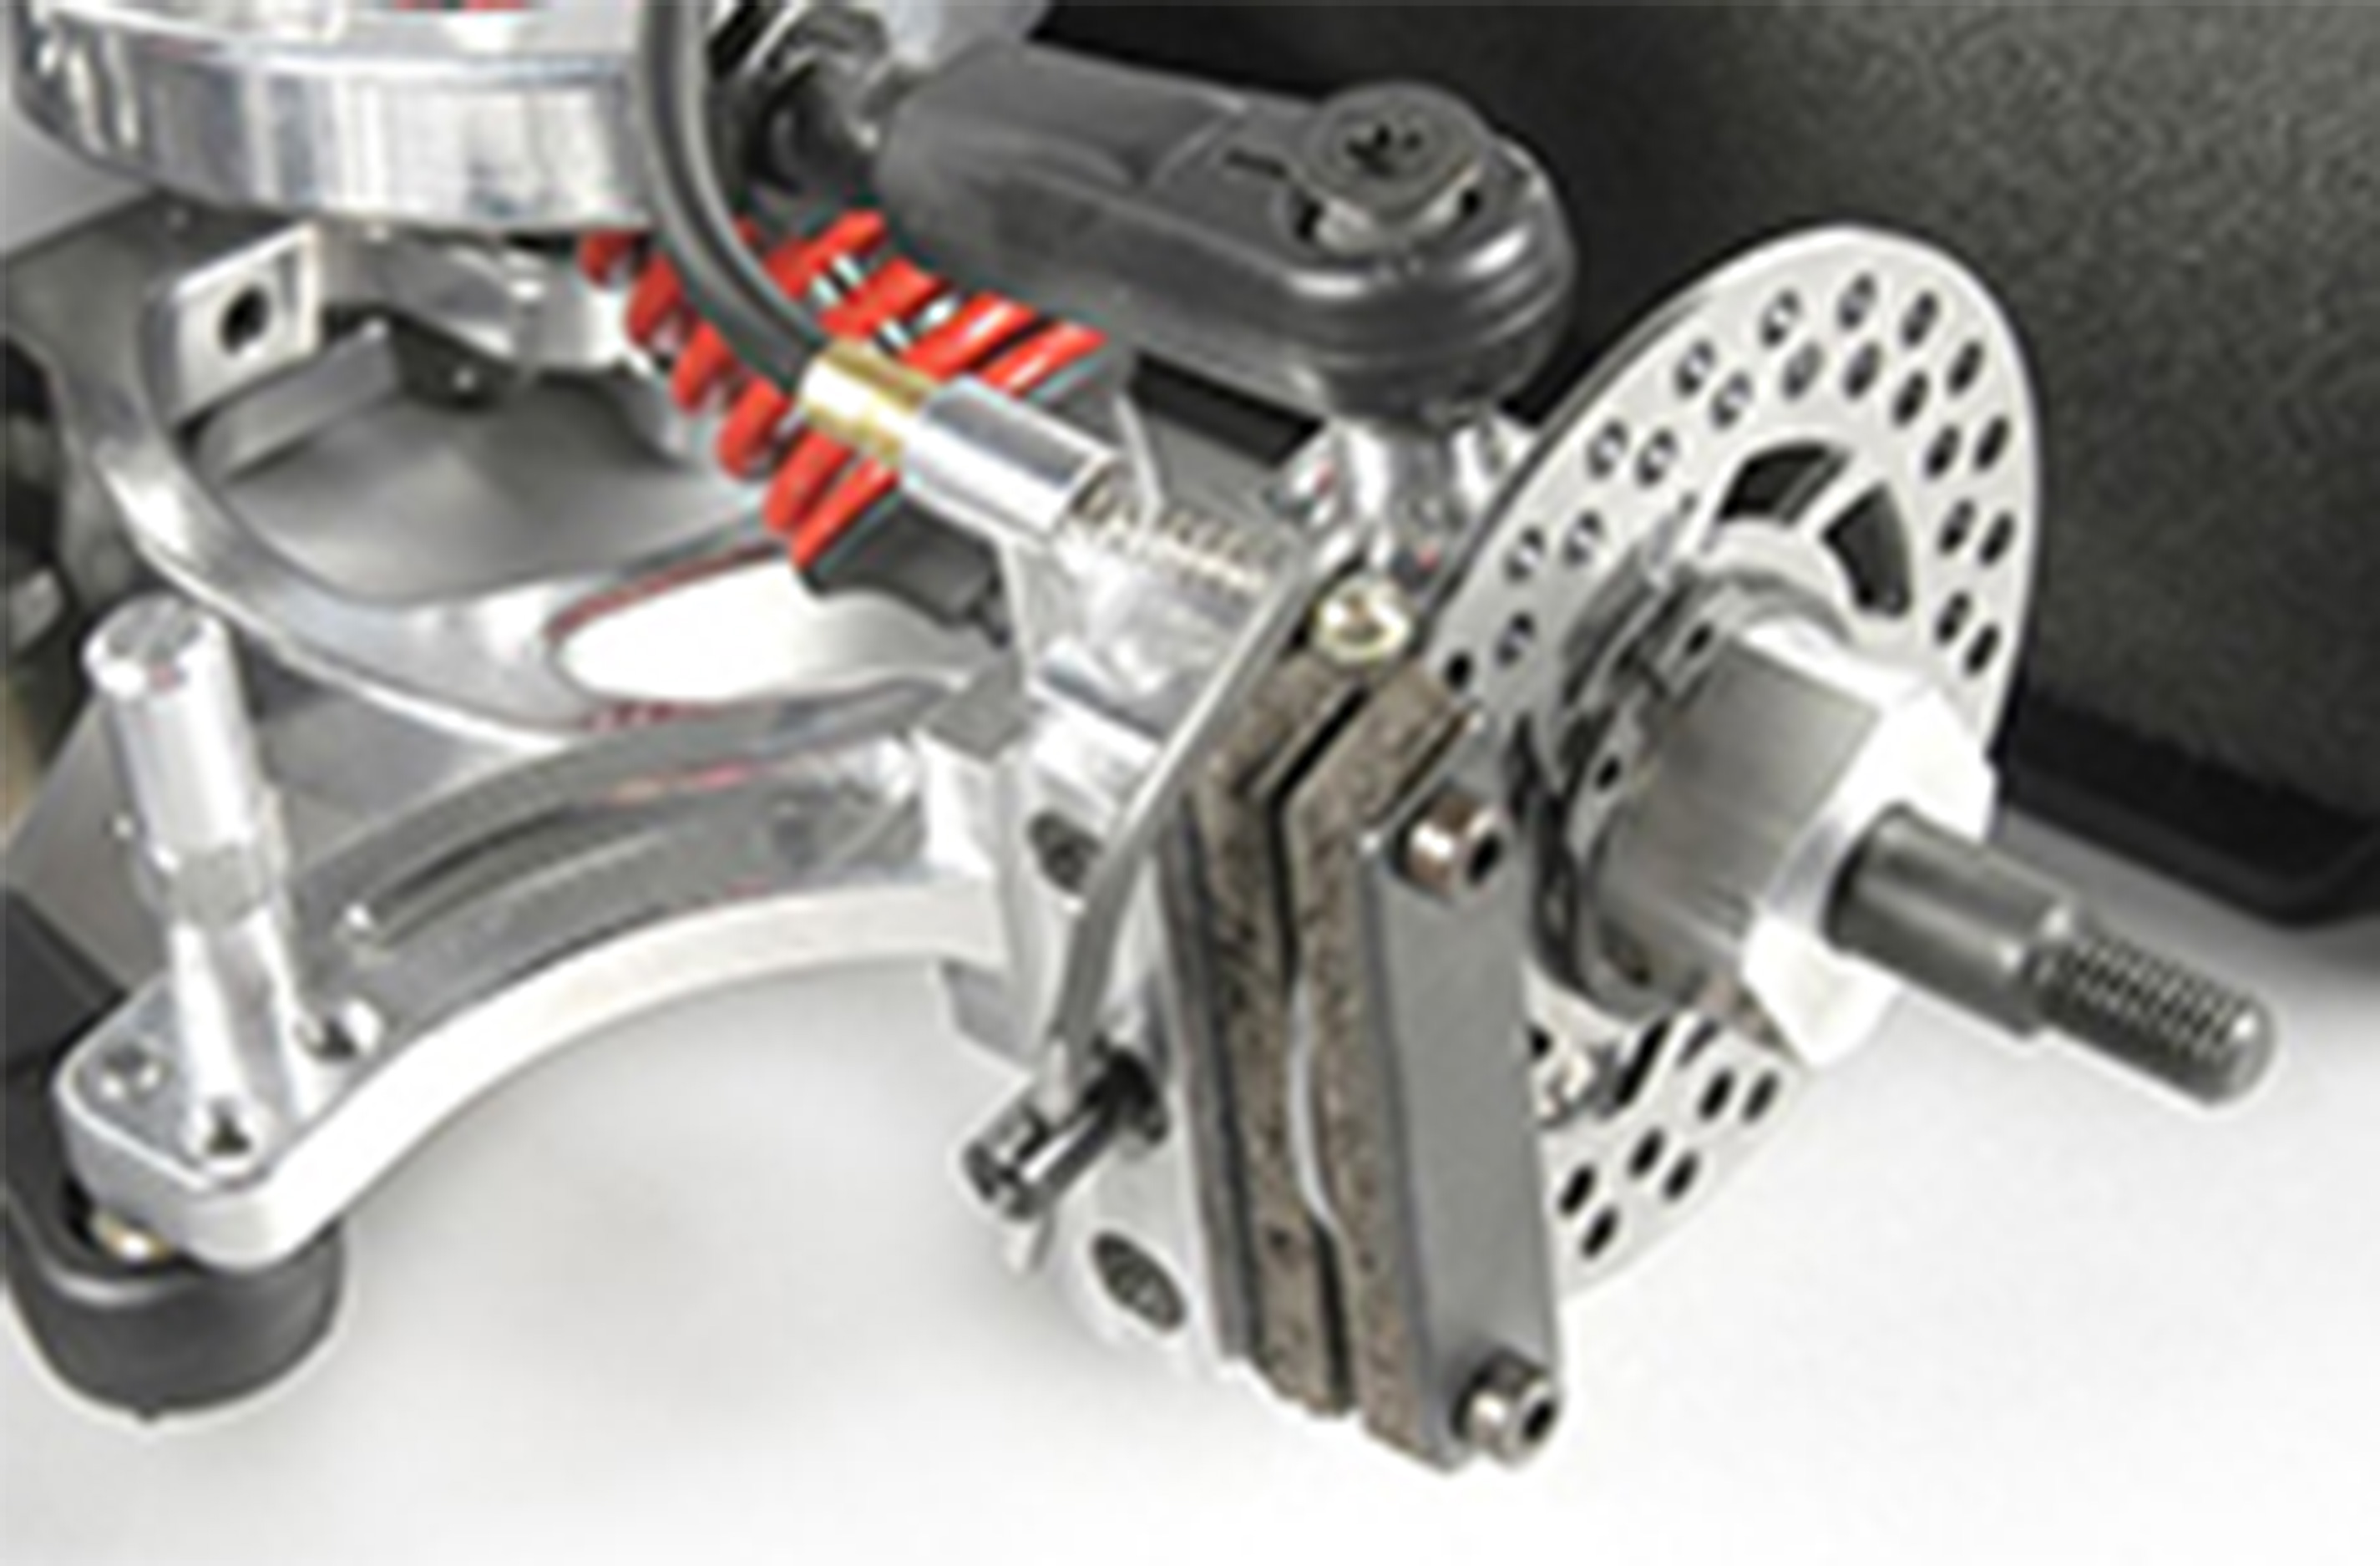 8450/01 FG Front disk brake for 1:5, 1:6, Off-Road Buggy 2WD, all 4WD - set